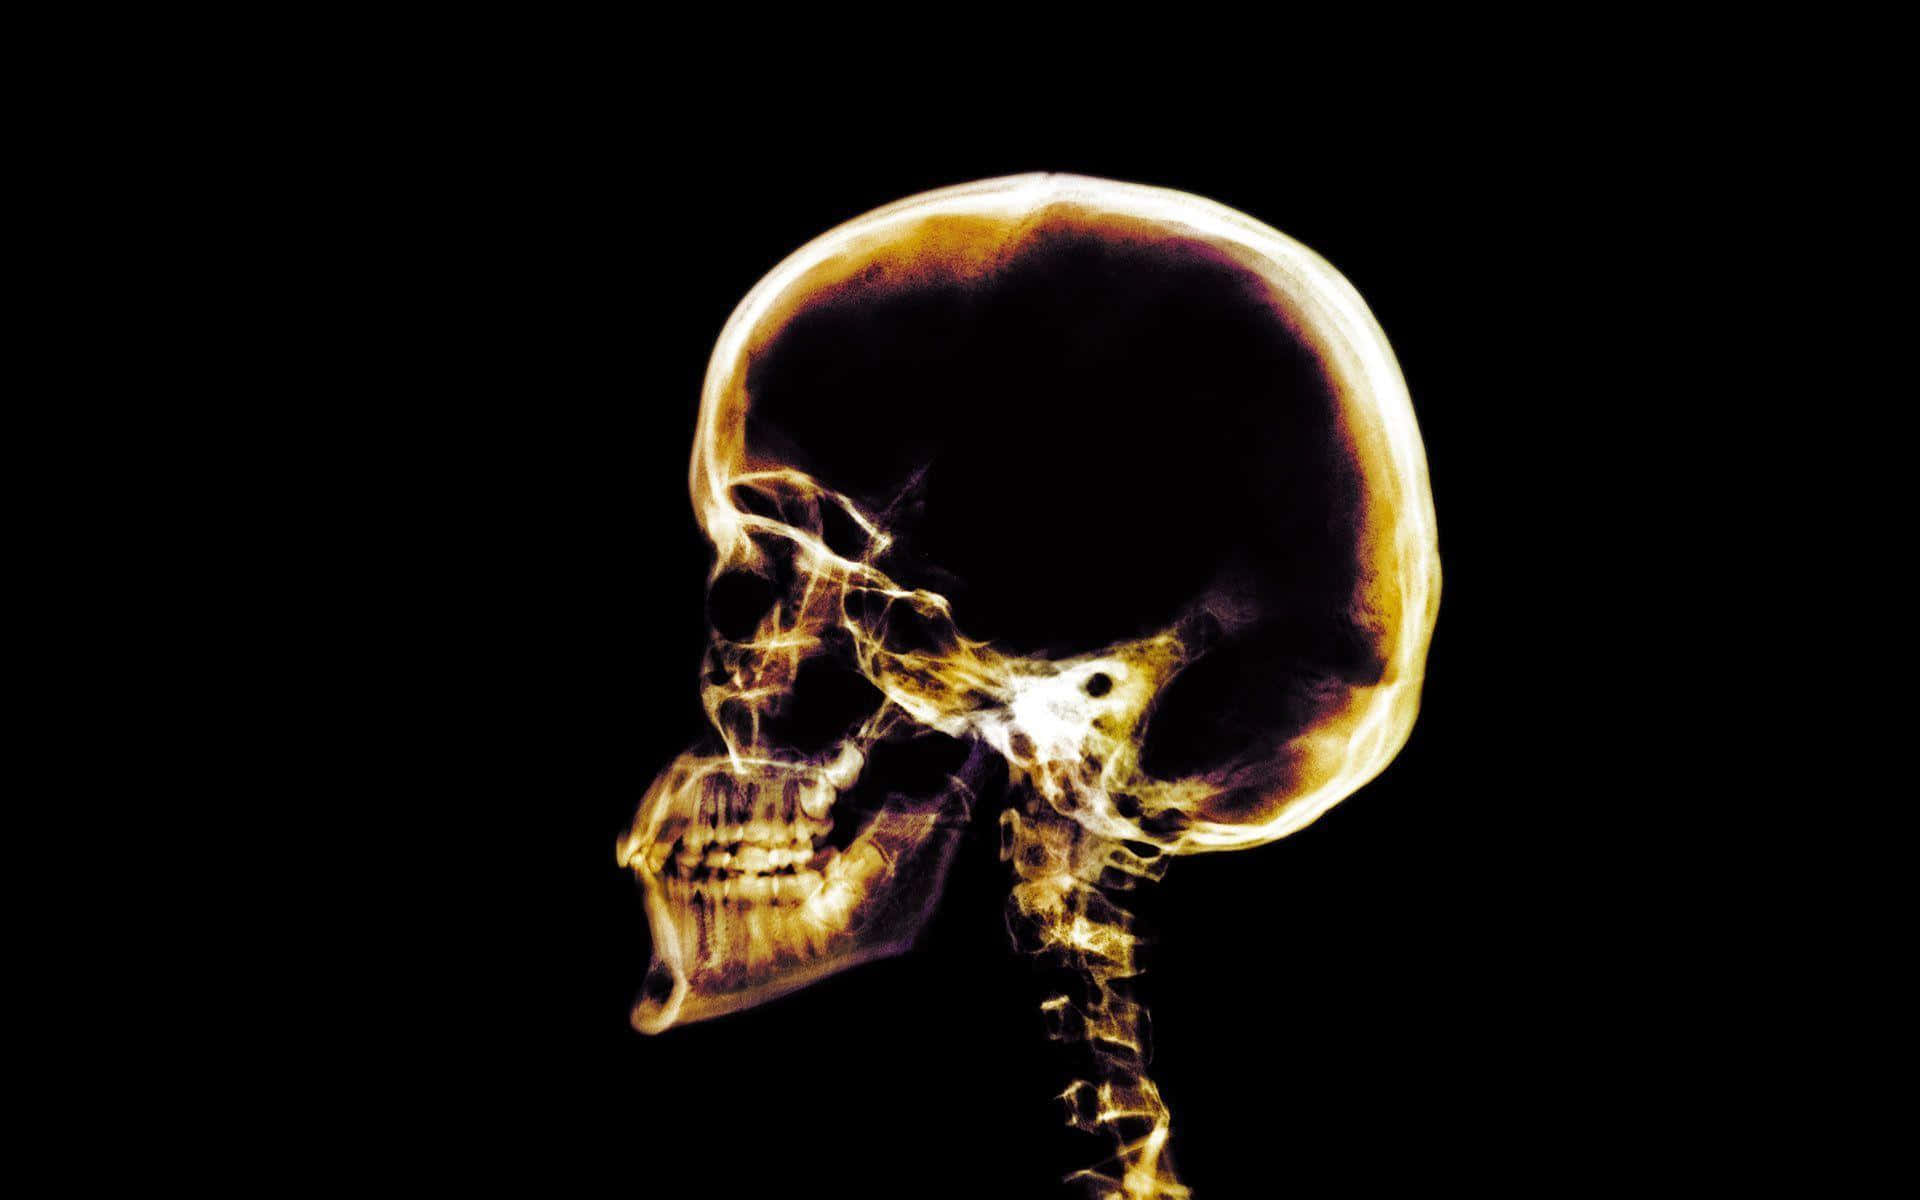 A X - Ray Image Of A Human Skull